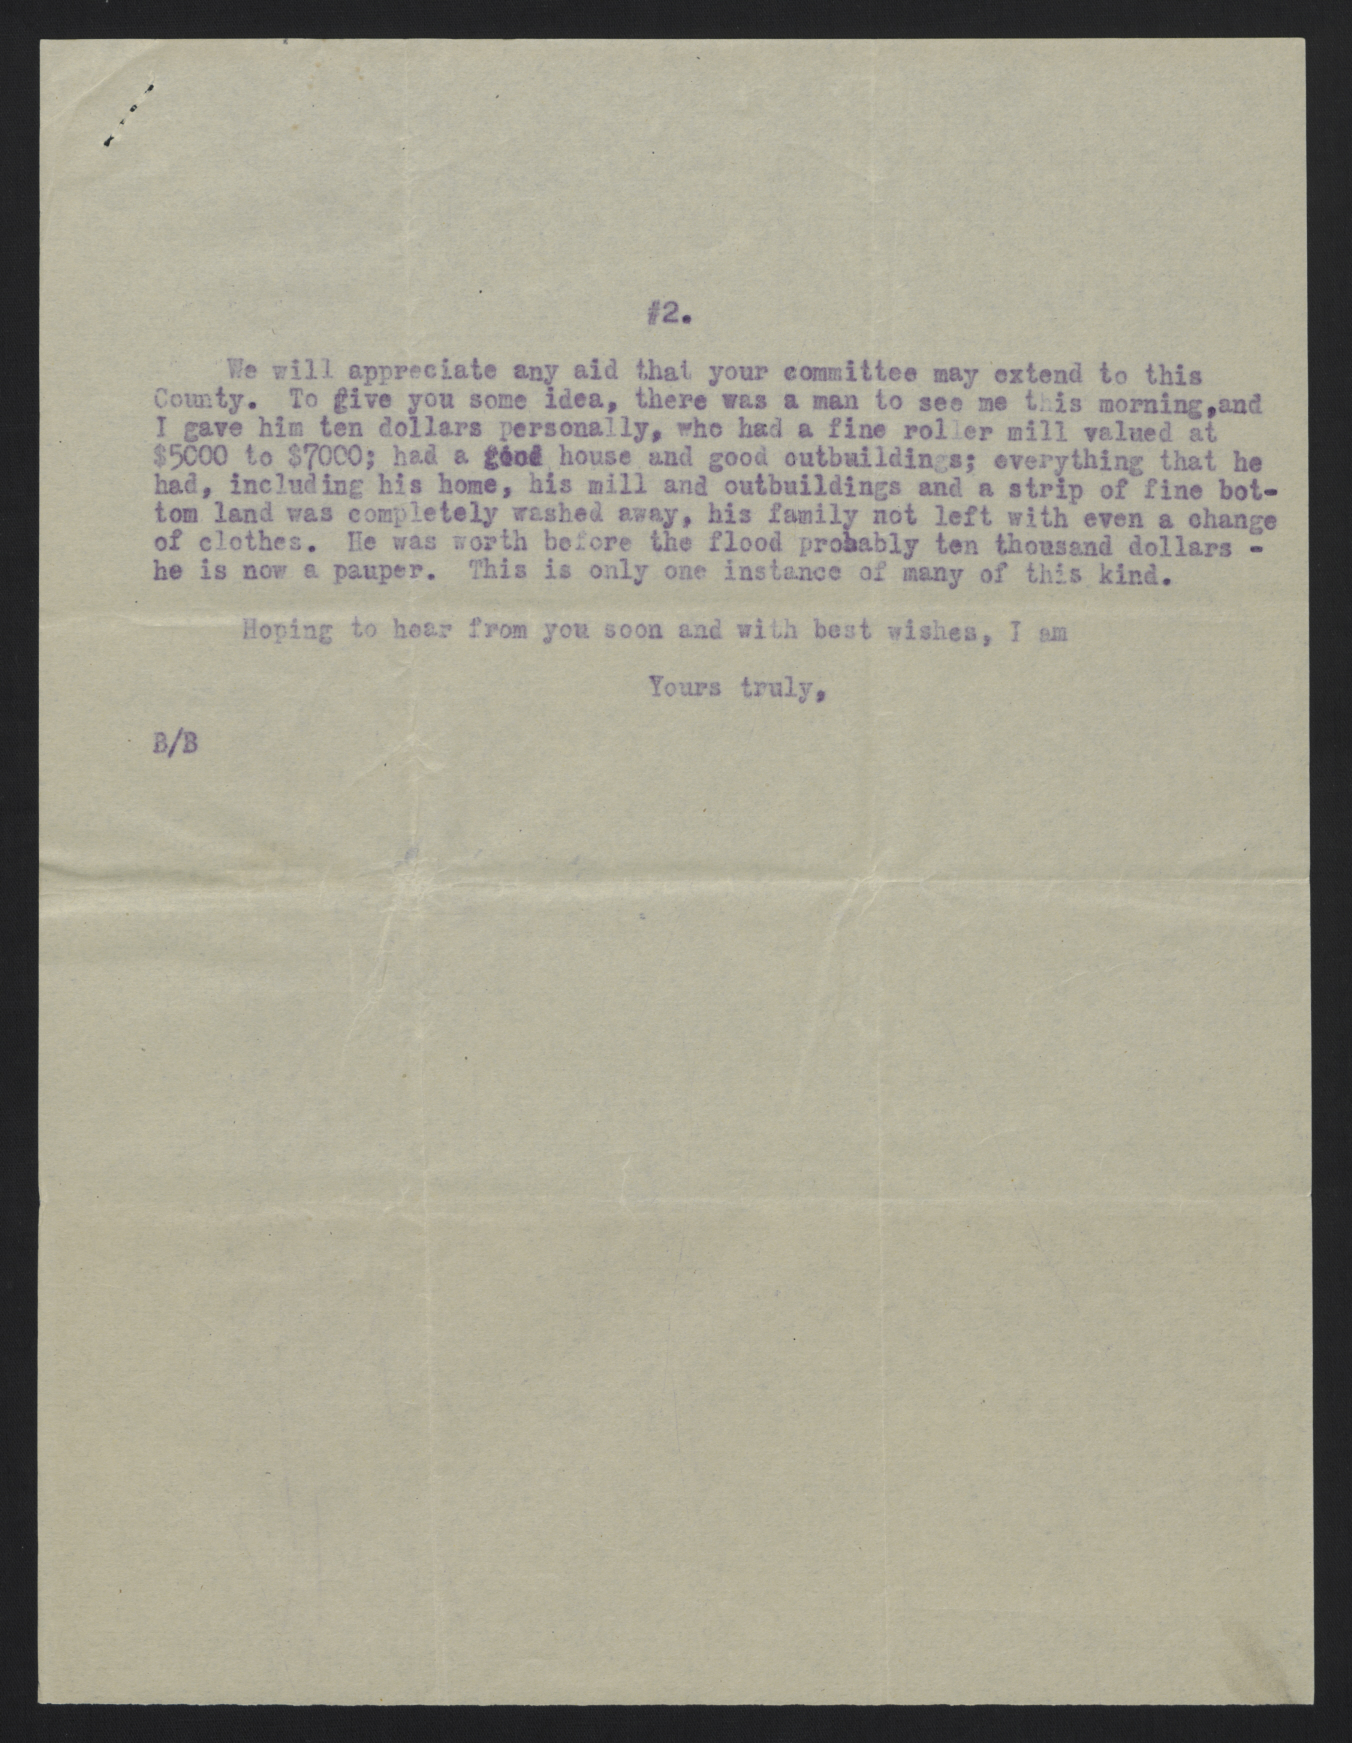 Letter from Bowie to Hanes, August 9, 1916, page 2